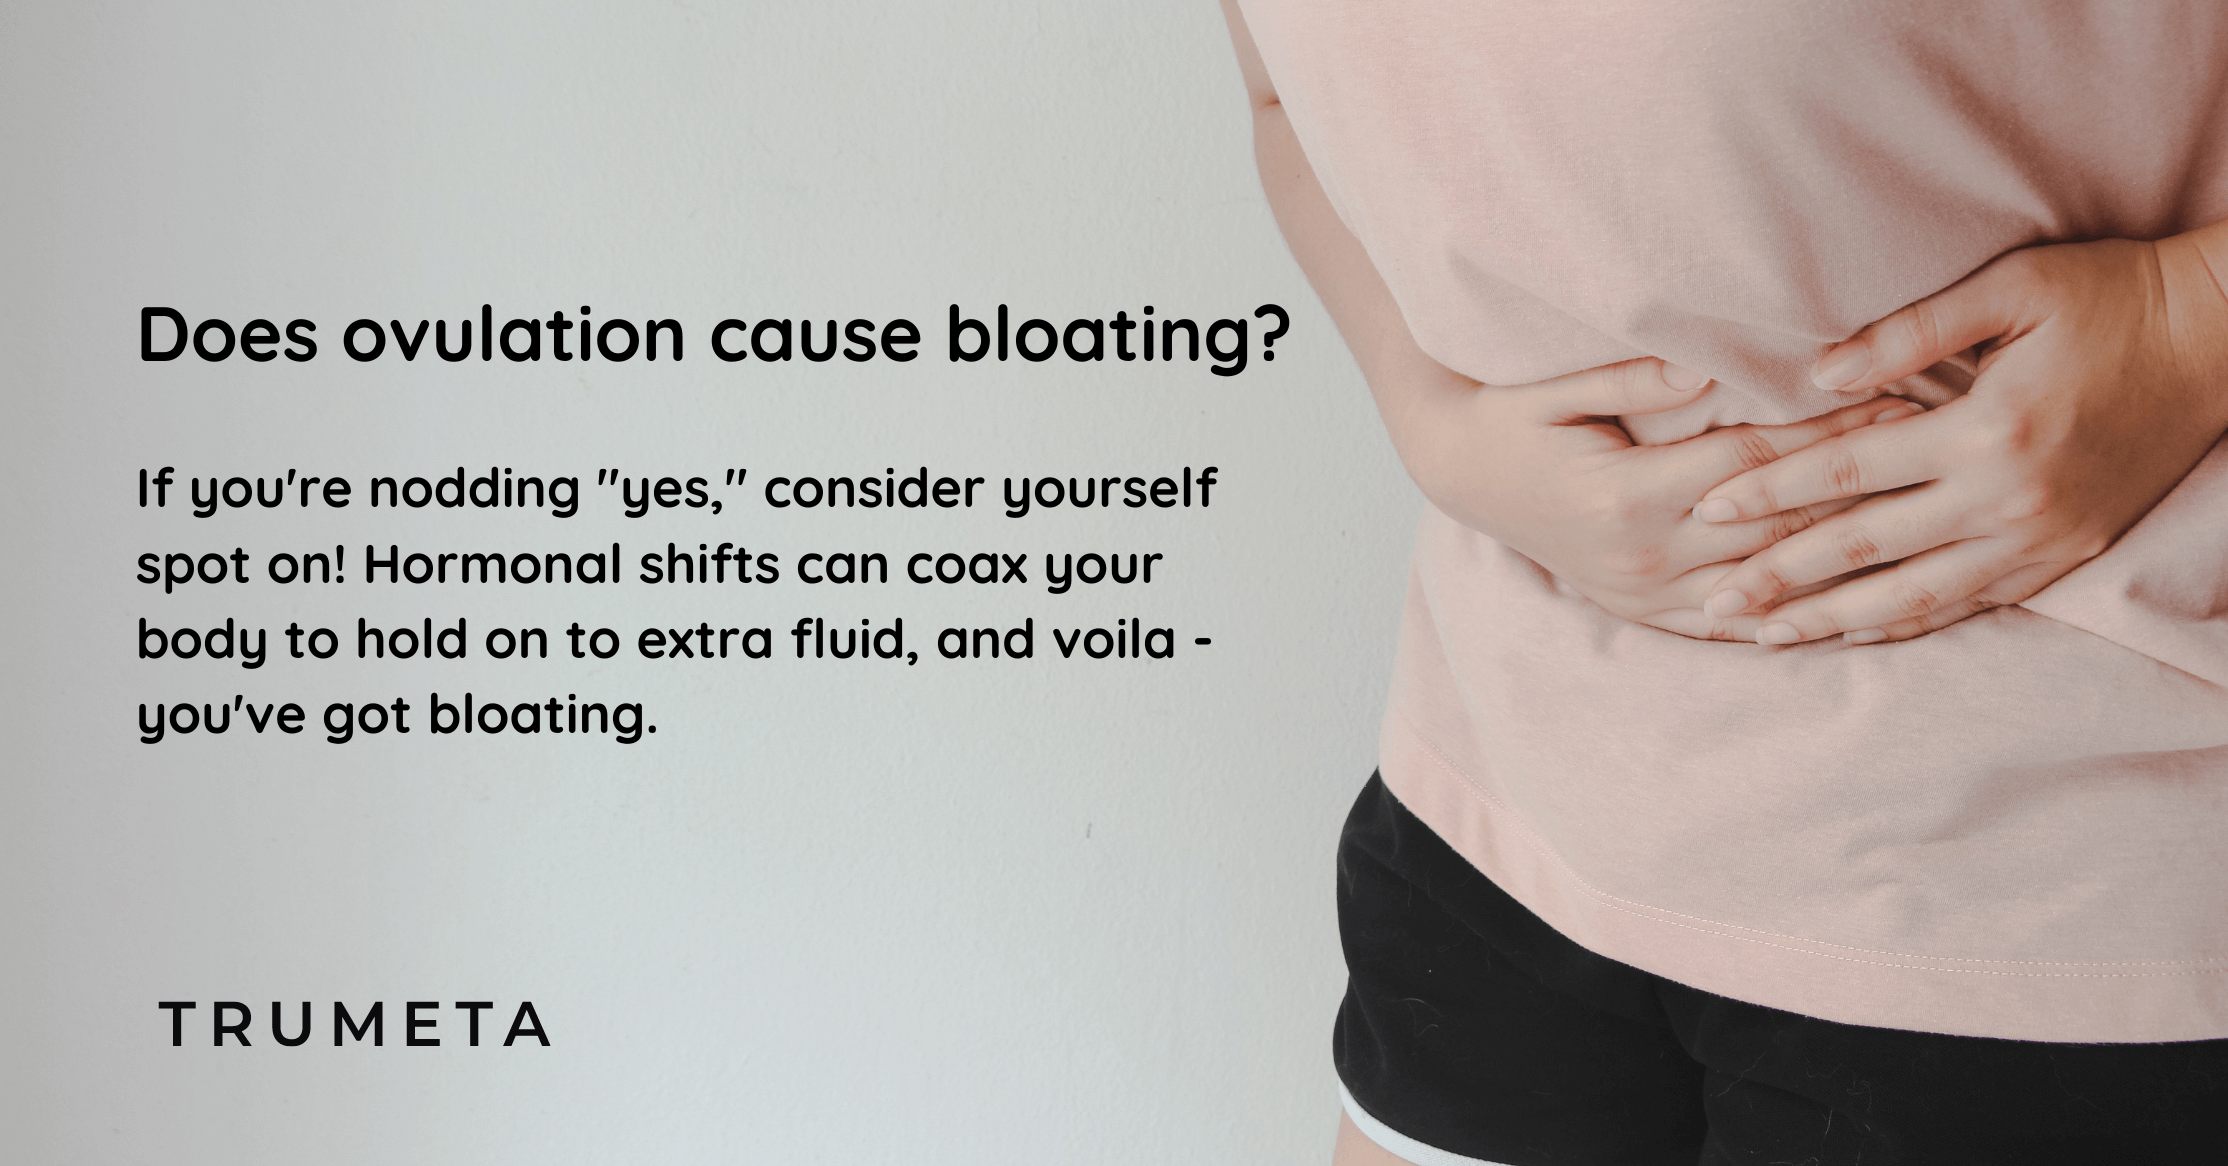 Does Ovulation Cause Bloating?